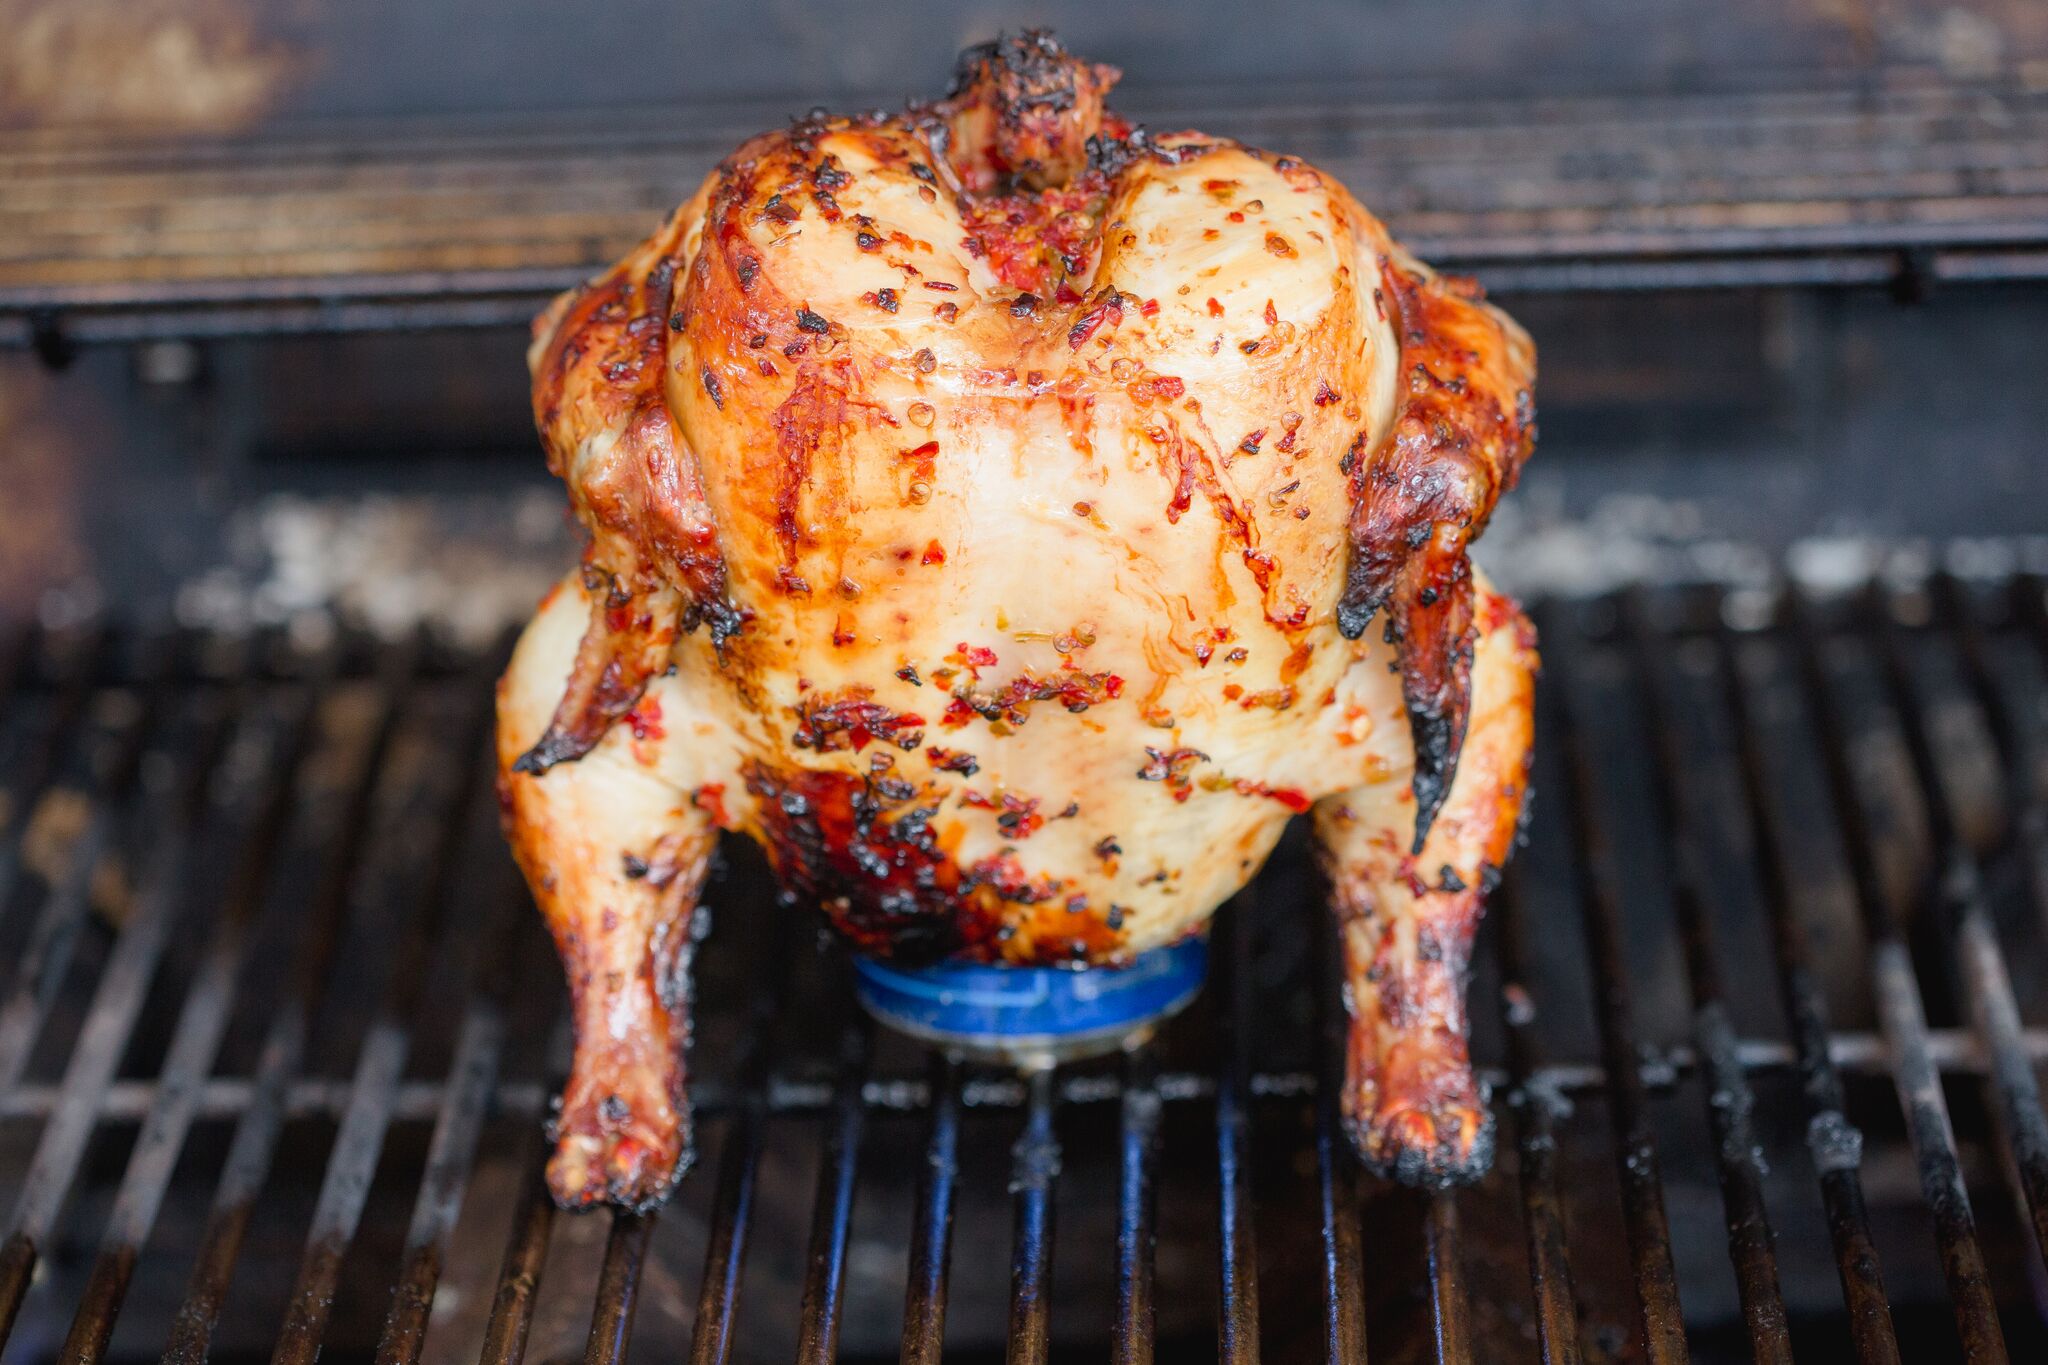 This beer can chicken is done grilling and looks delicious!